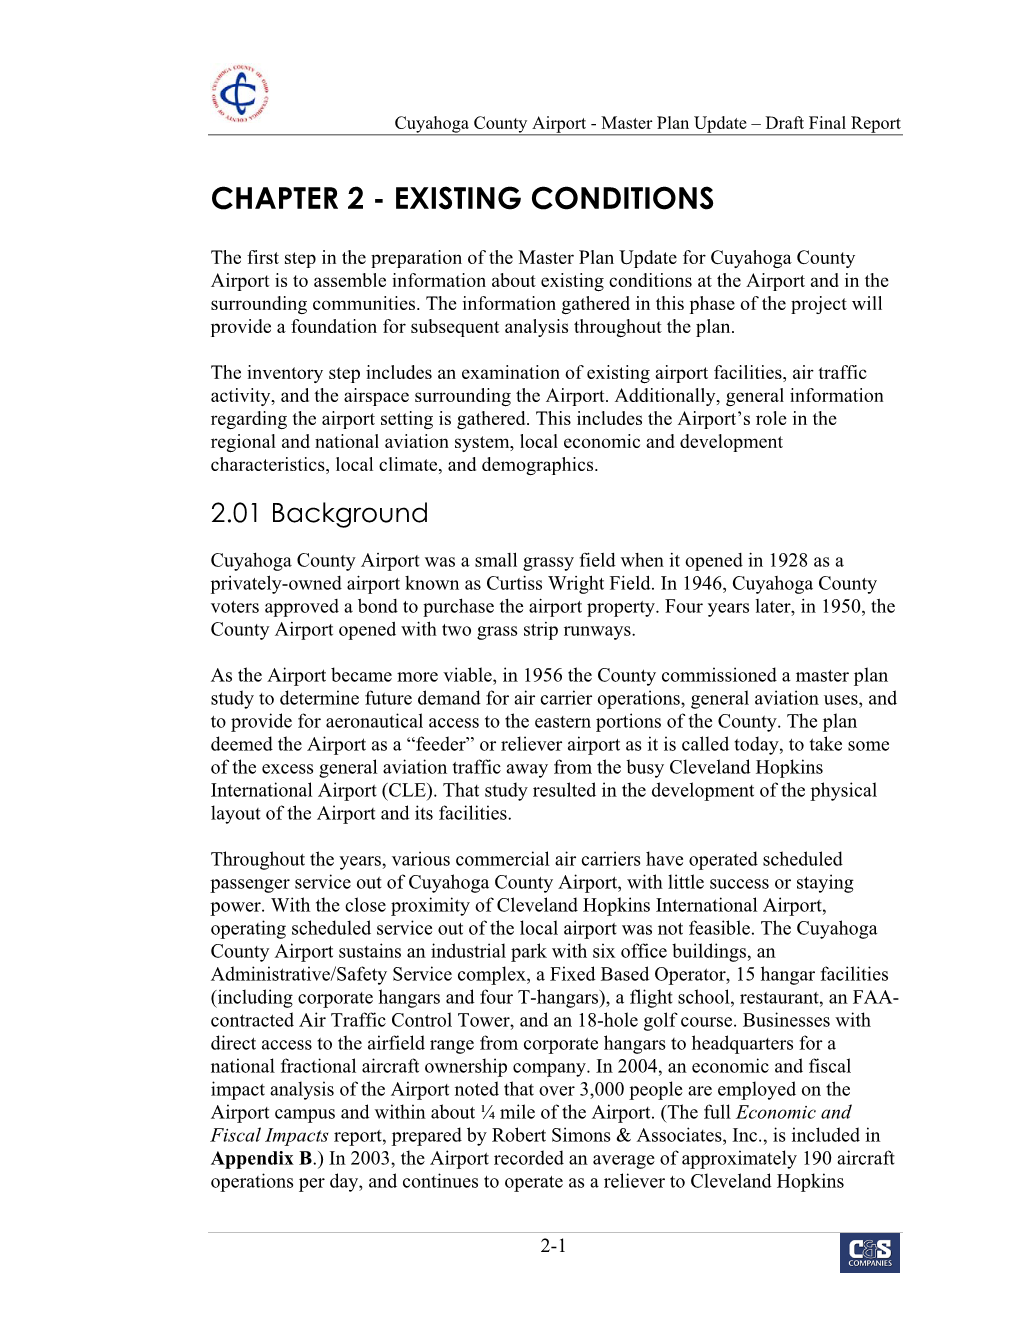 Chapter 2 - Existing Conditions